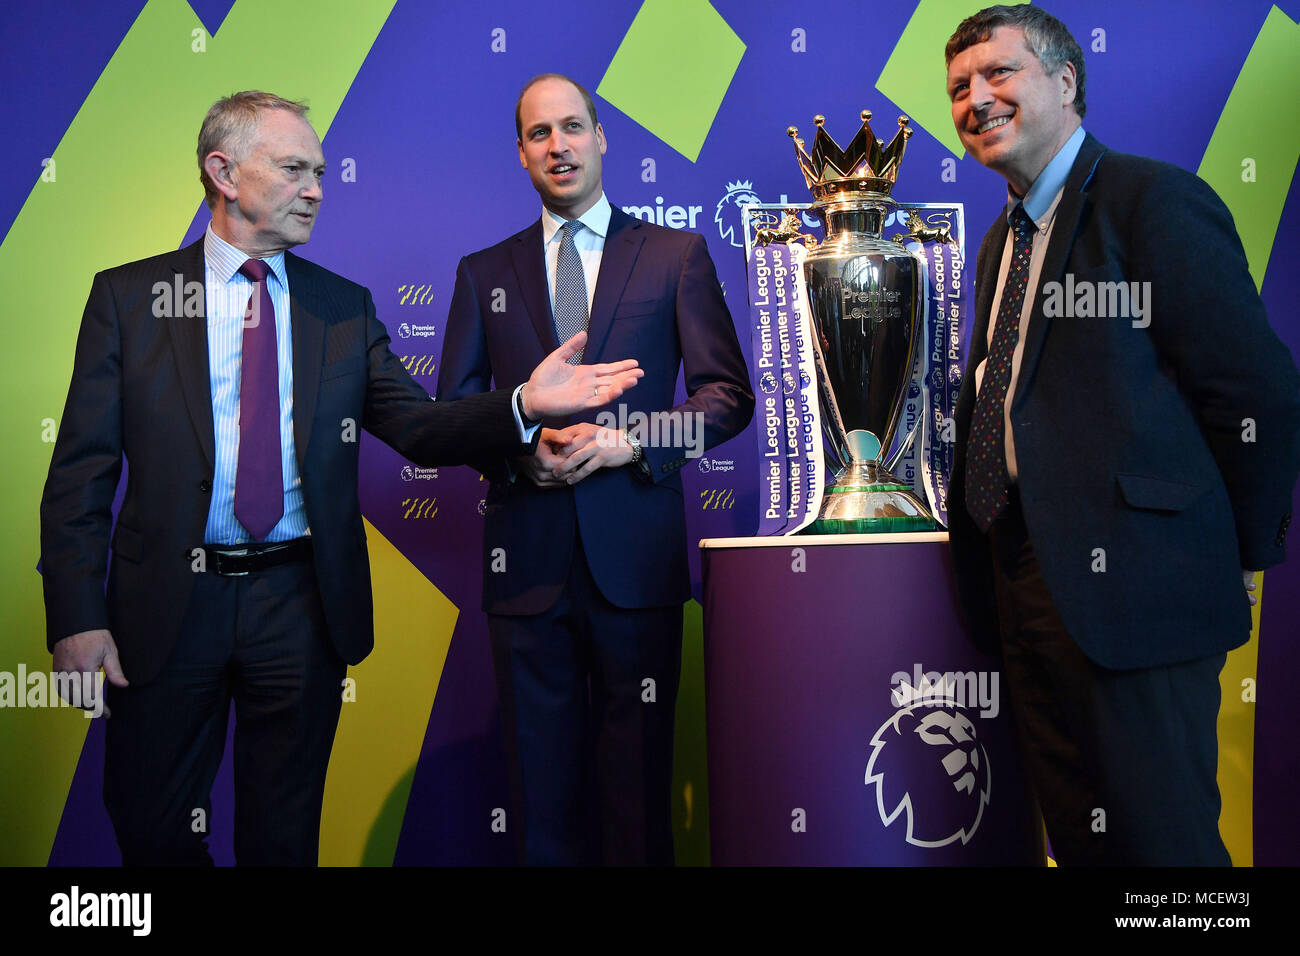 The Duke of Cambridge (centre) standing next to the English Premier League football trophy at a Welcome to the UK reception on the opening day of the Commonwealth Heads of Government Meeting (CHOGM) at the Queen Elizabeth II Conference Centre, London. Stock Photo